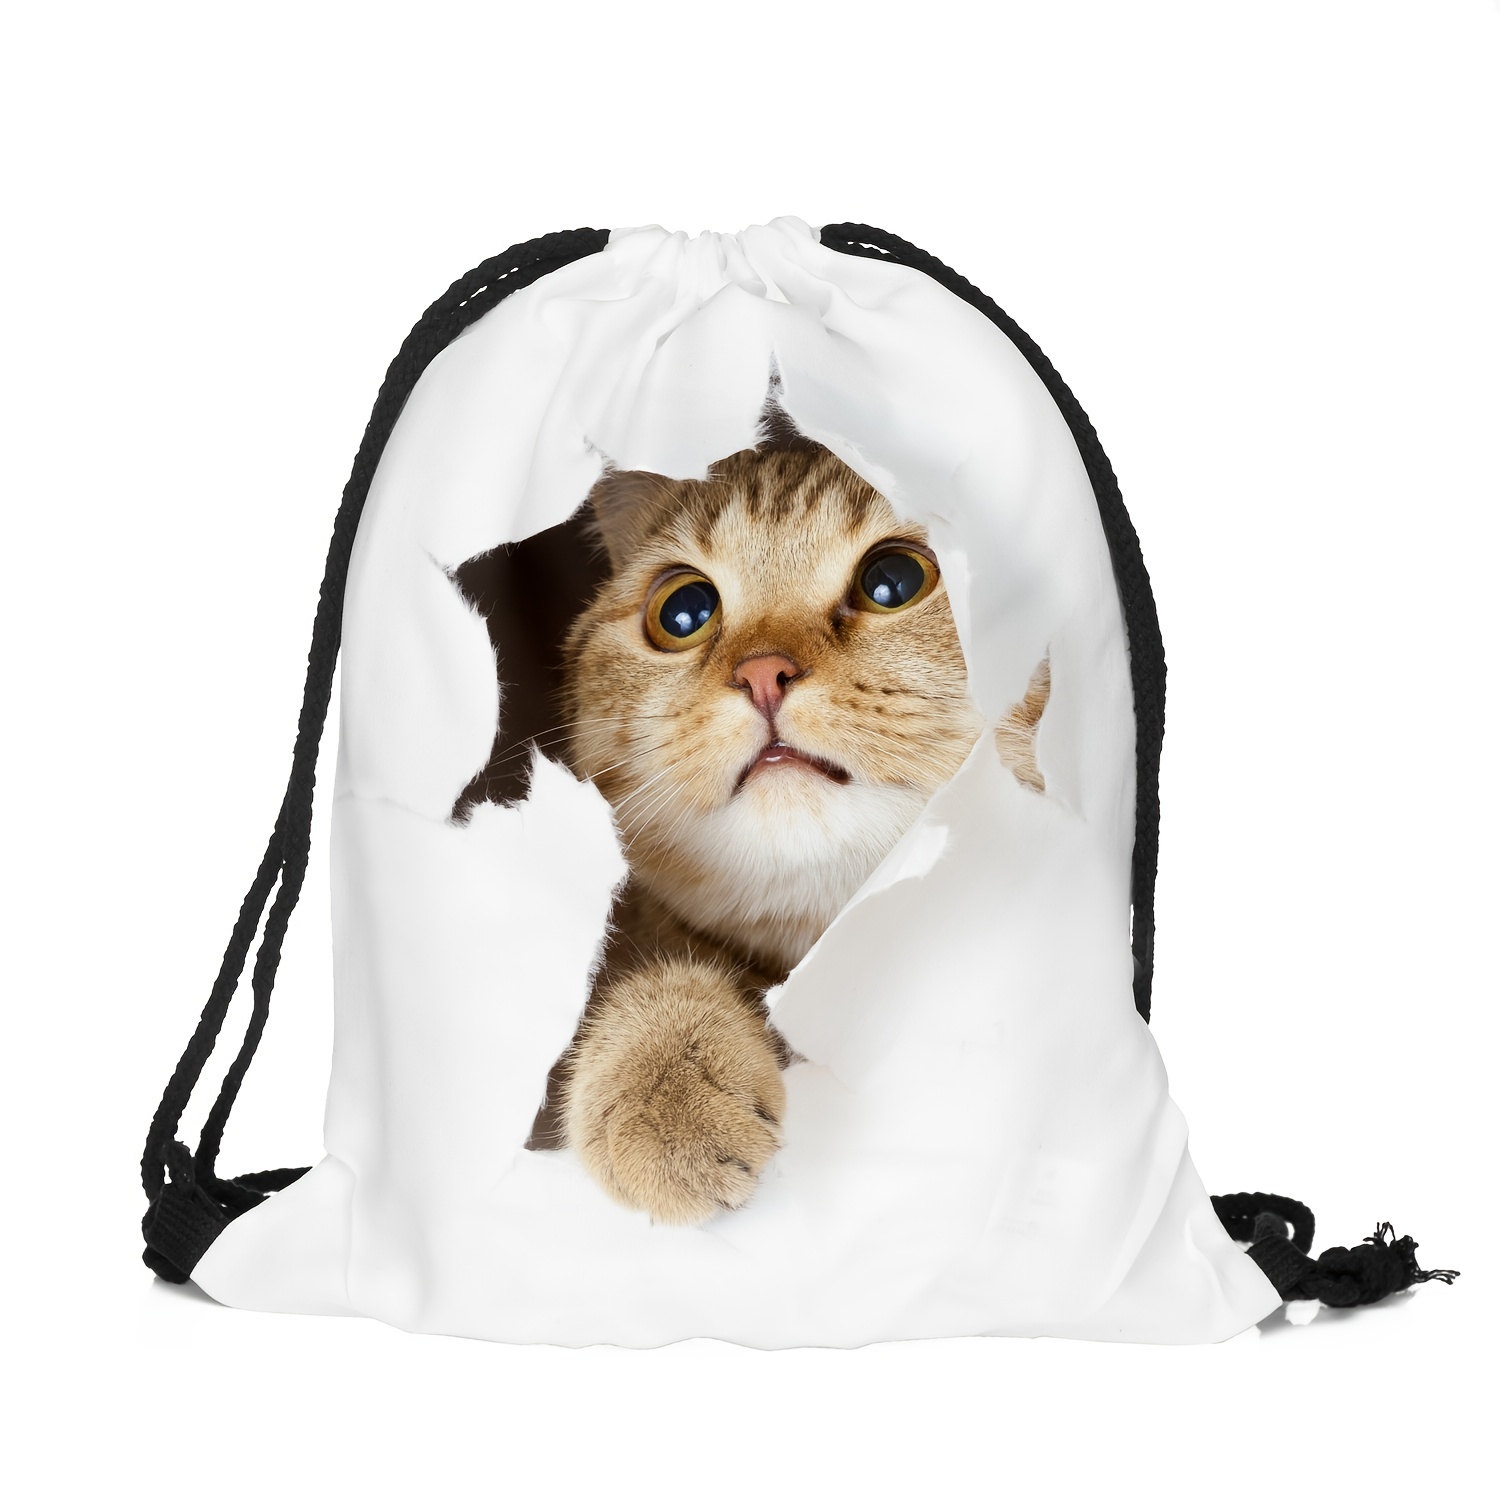 Buy Cat Pattern Storage Backpack Portable Bag With Drawstring Lightweight Sports Bag